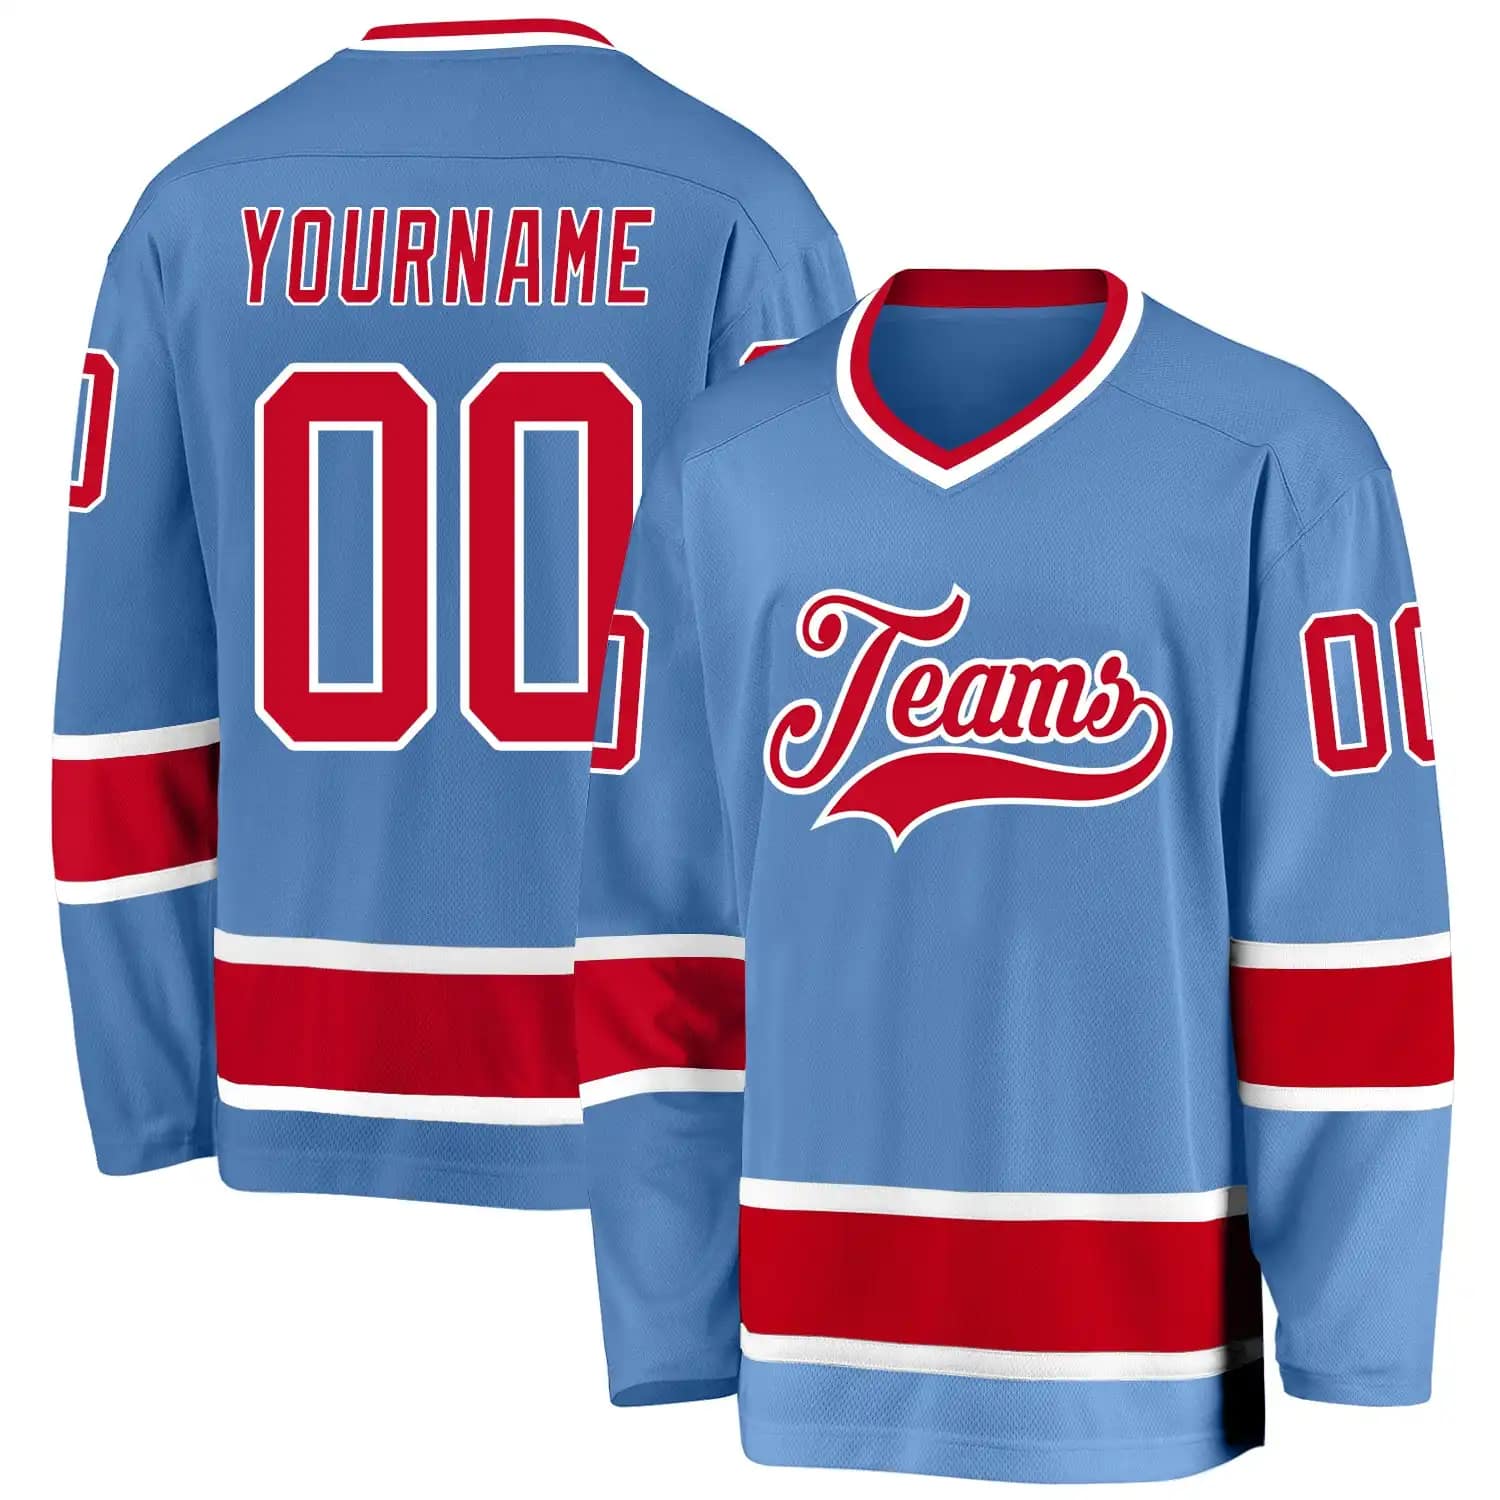 Stitched And Print Light Blue Red-white Hockey Jersey Custom